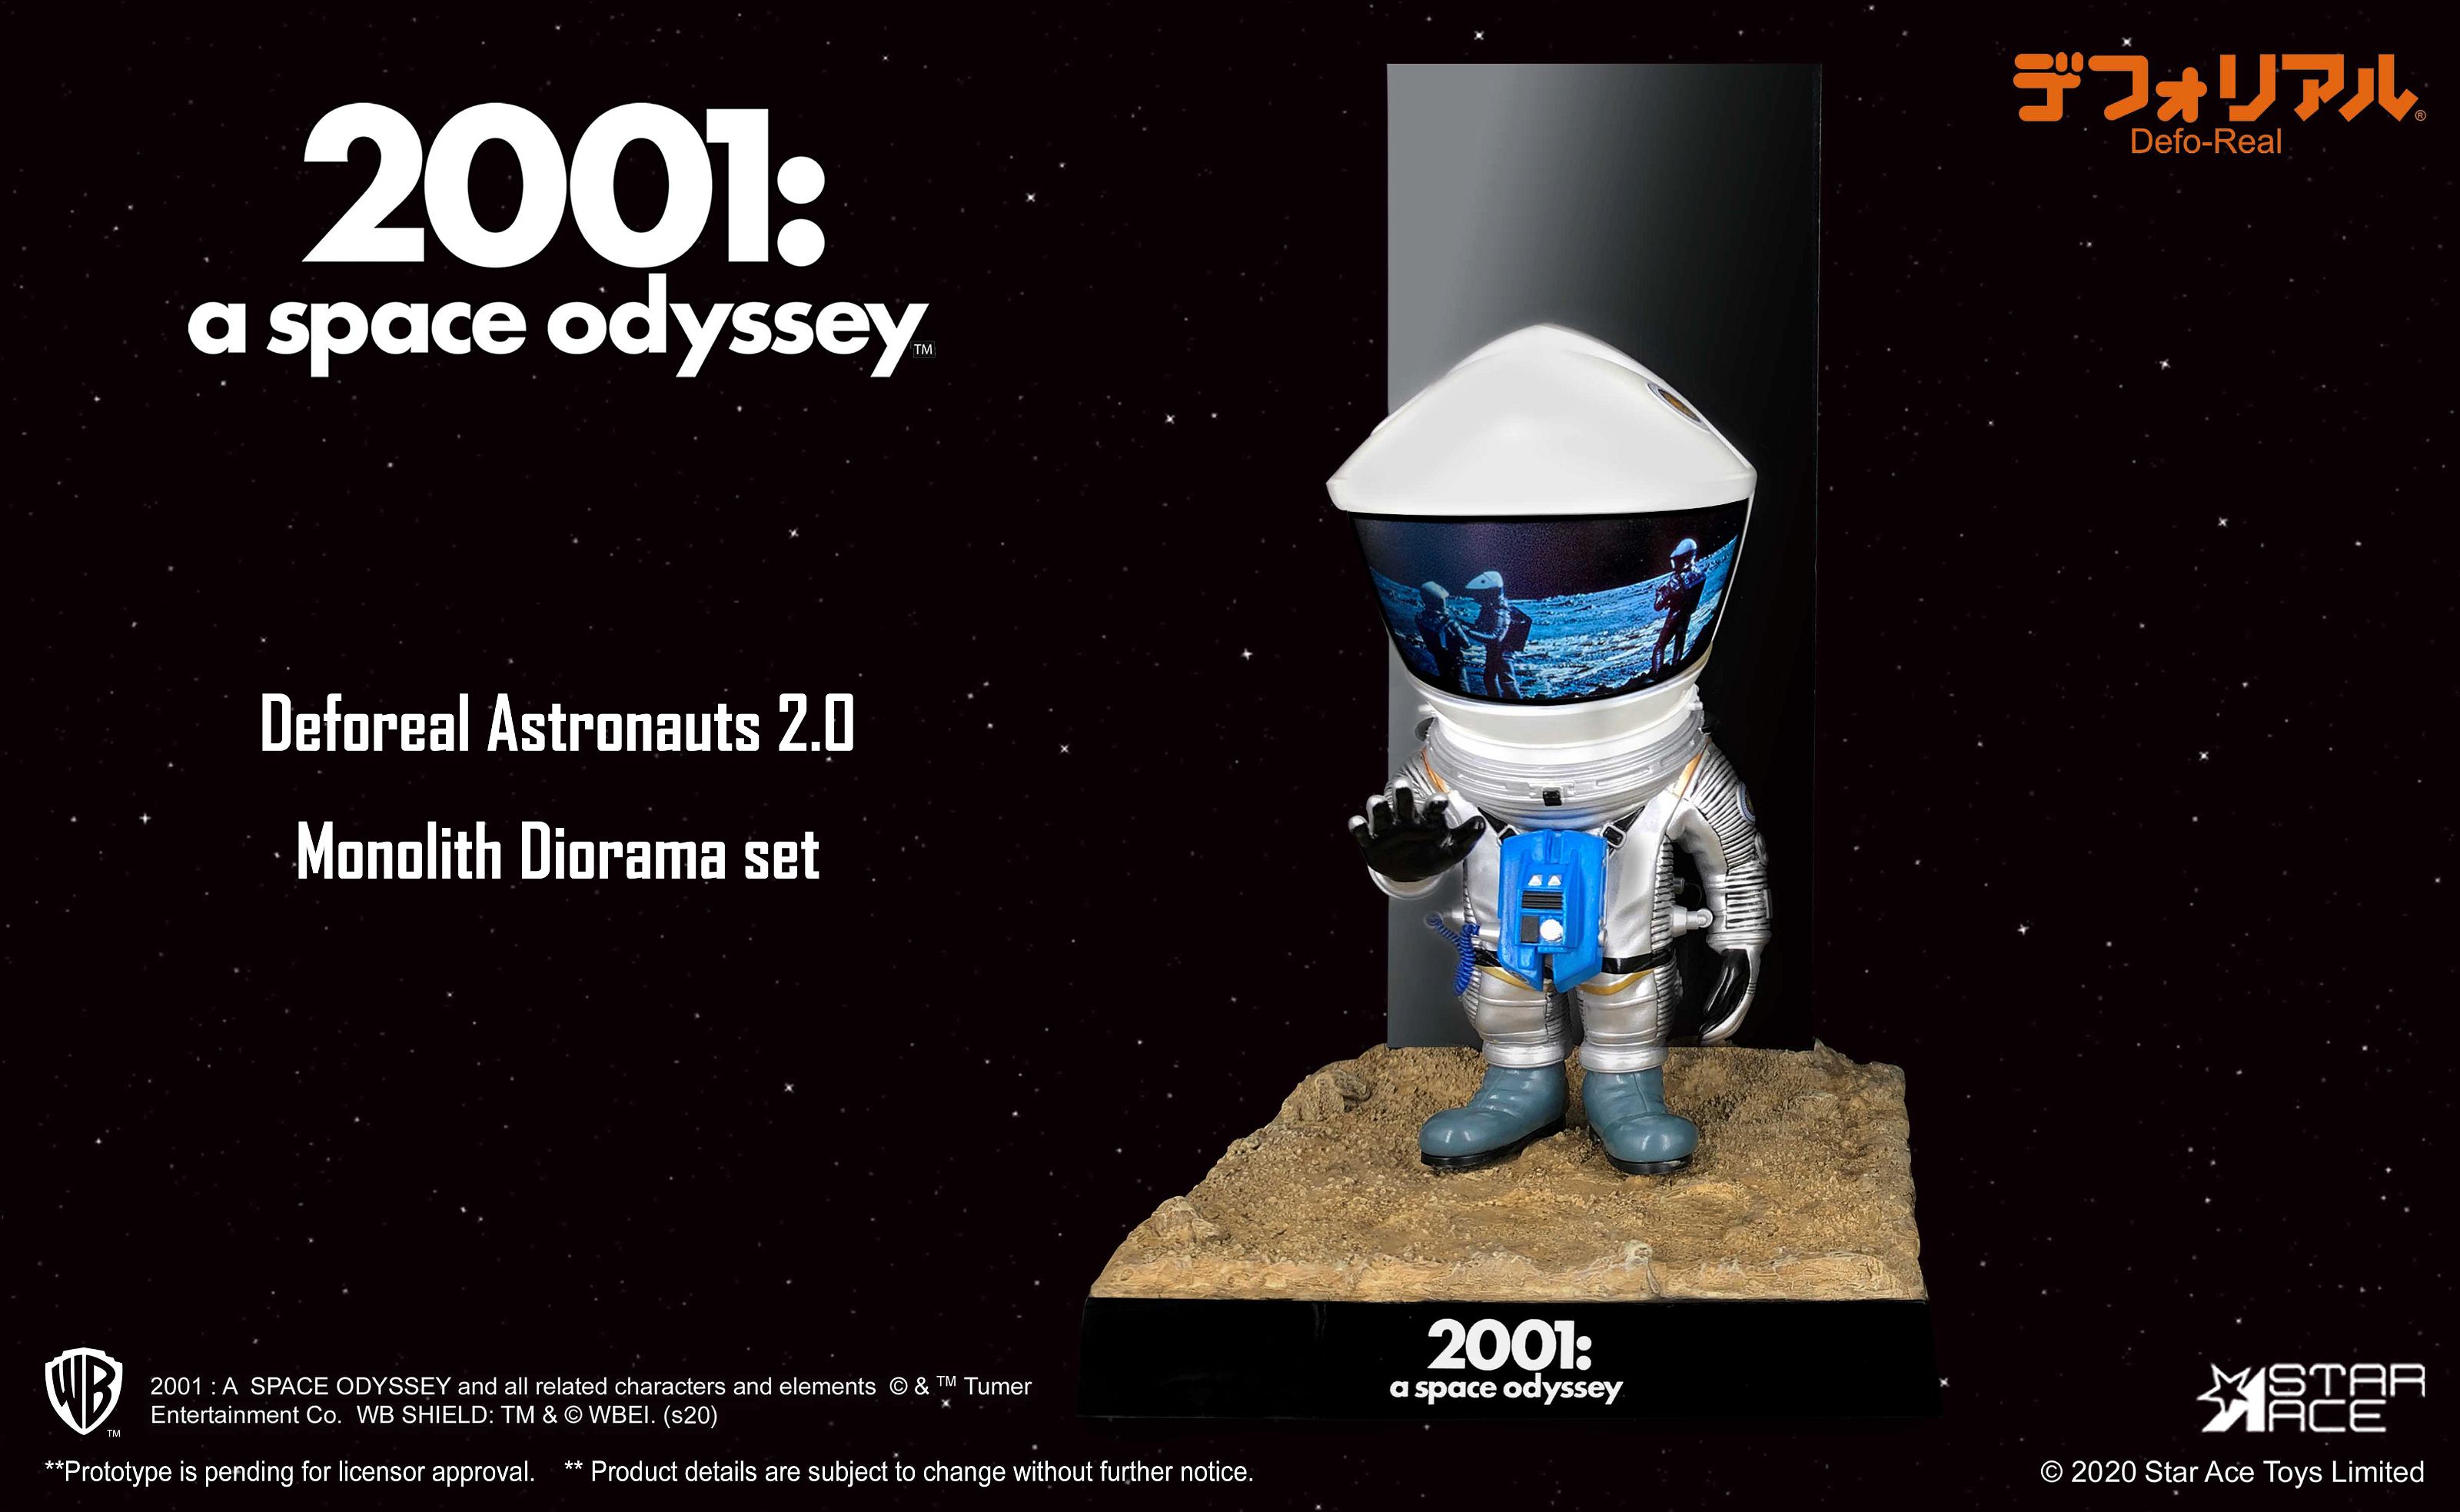 DEFOREAL 2001 A SPACE ODYSSEY: ASTRONAUTS 2.0 MONOLITH DIORAMA SET Star Ace Toys